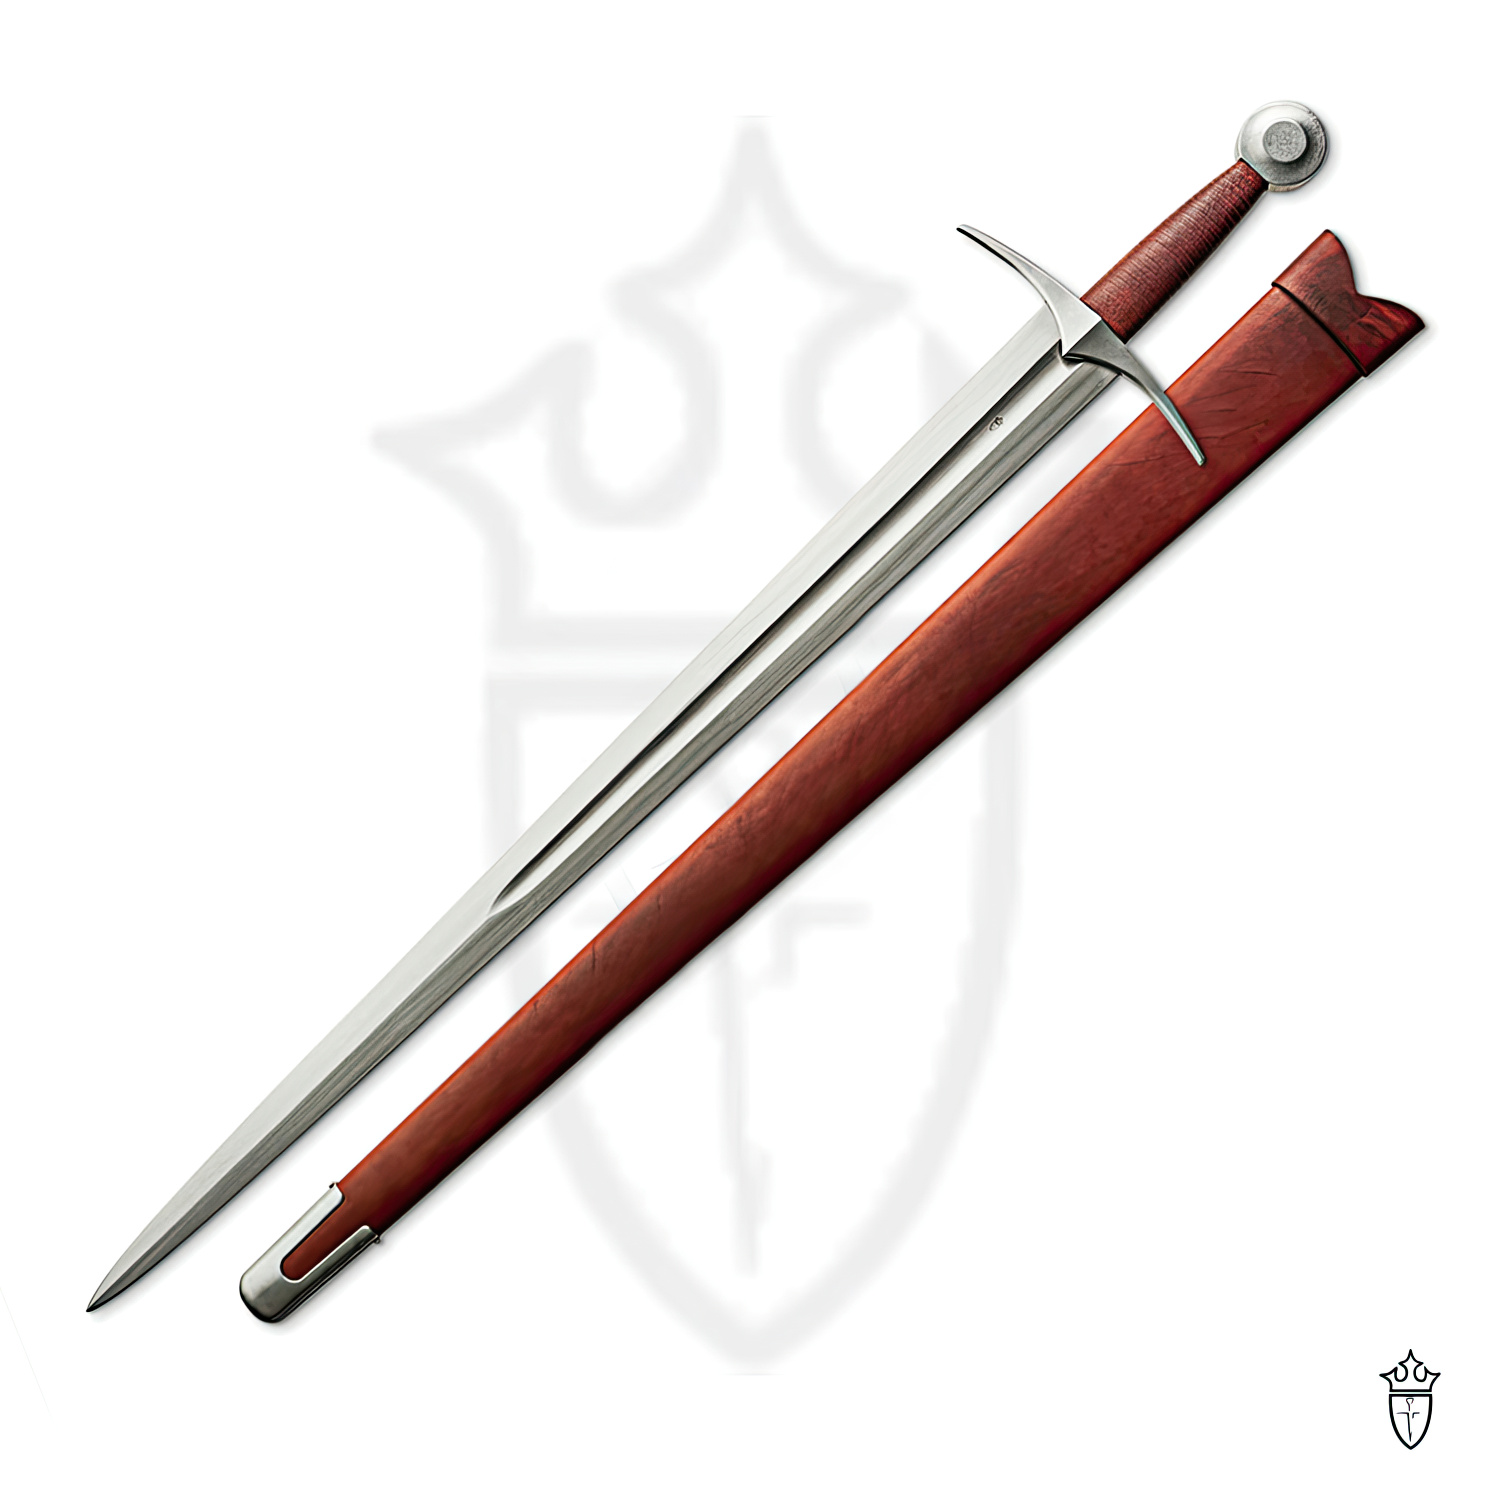 Main Arming Sword Atrim Design Type XIV by Kingston Arms Sword with Scabbard